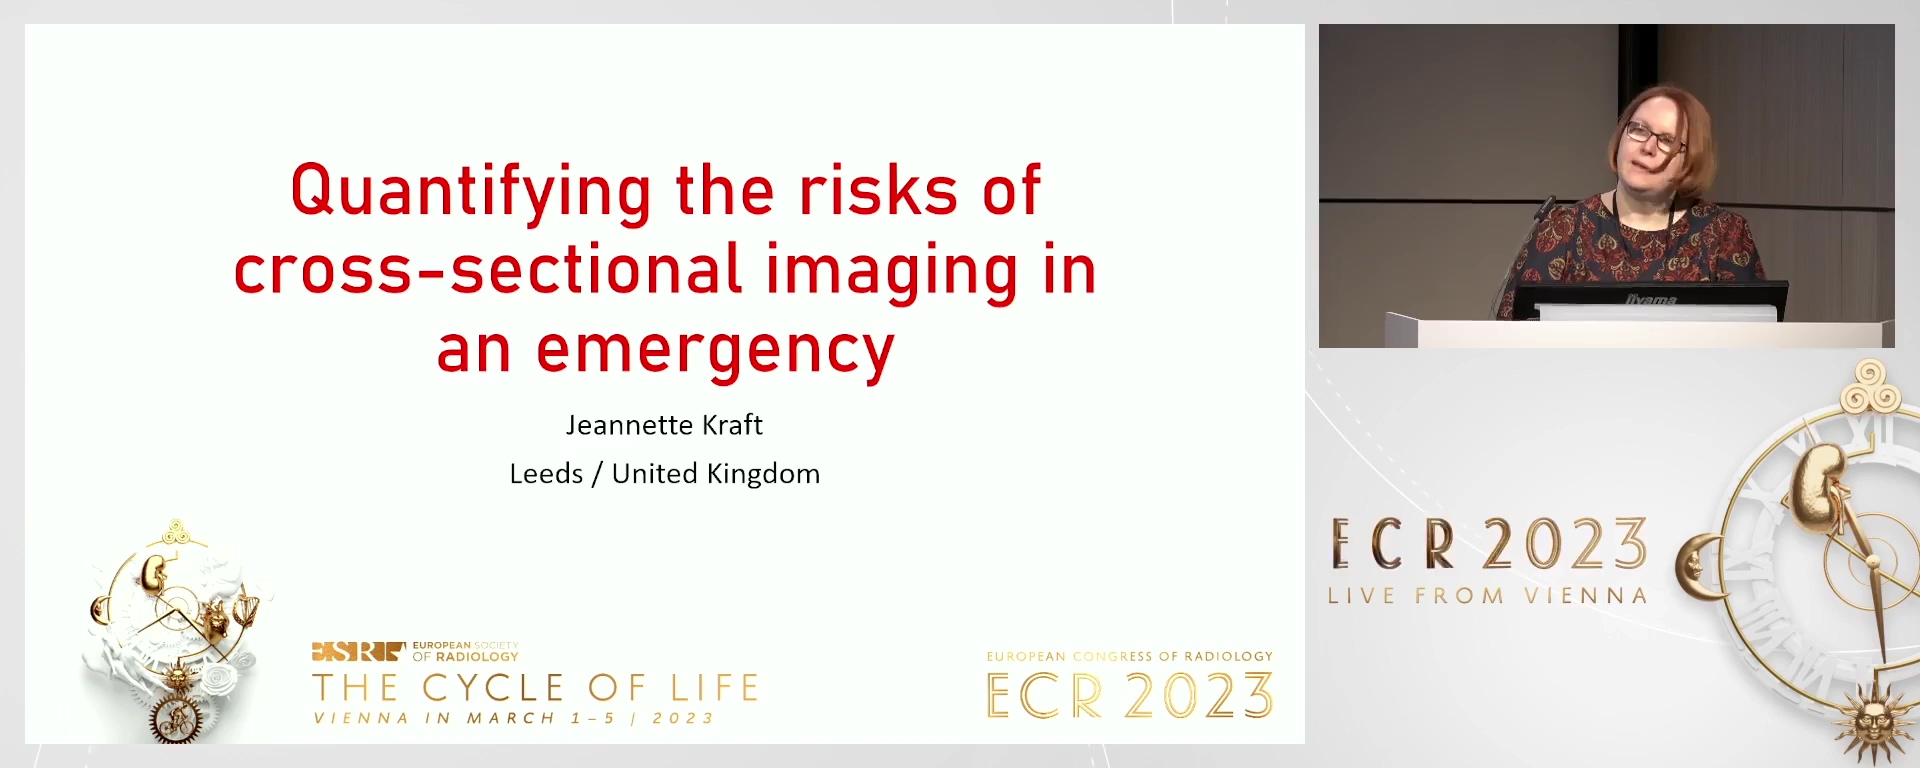 Quantifying the risks of cross-sectional imaging in an emergency